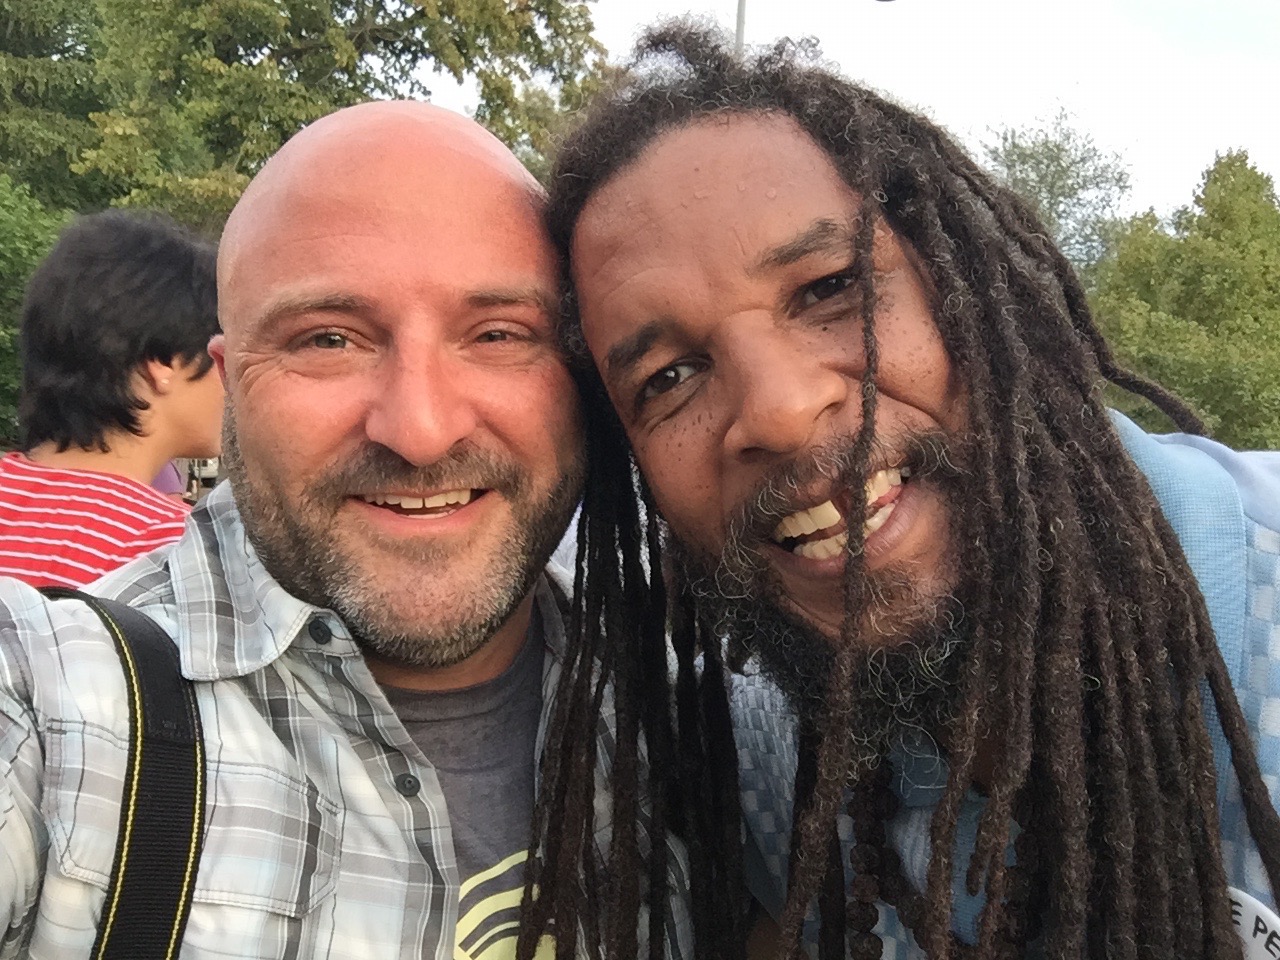   Baba Ras D poses for a selfie with Drew at the  Petworth Jazz Project . August 29, 2015.  